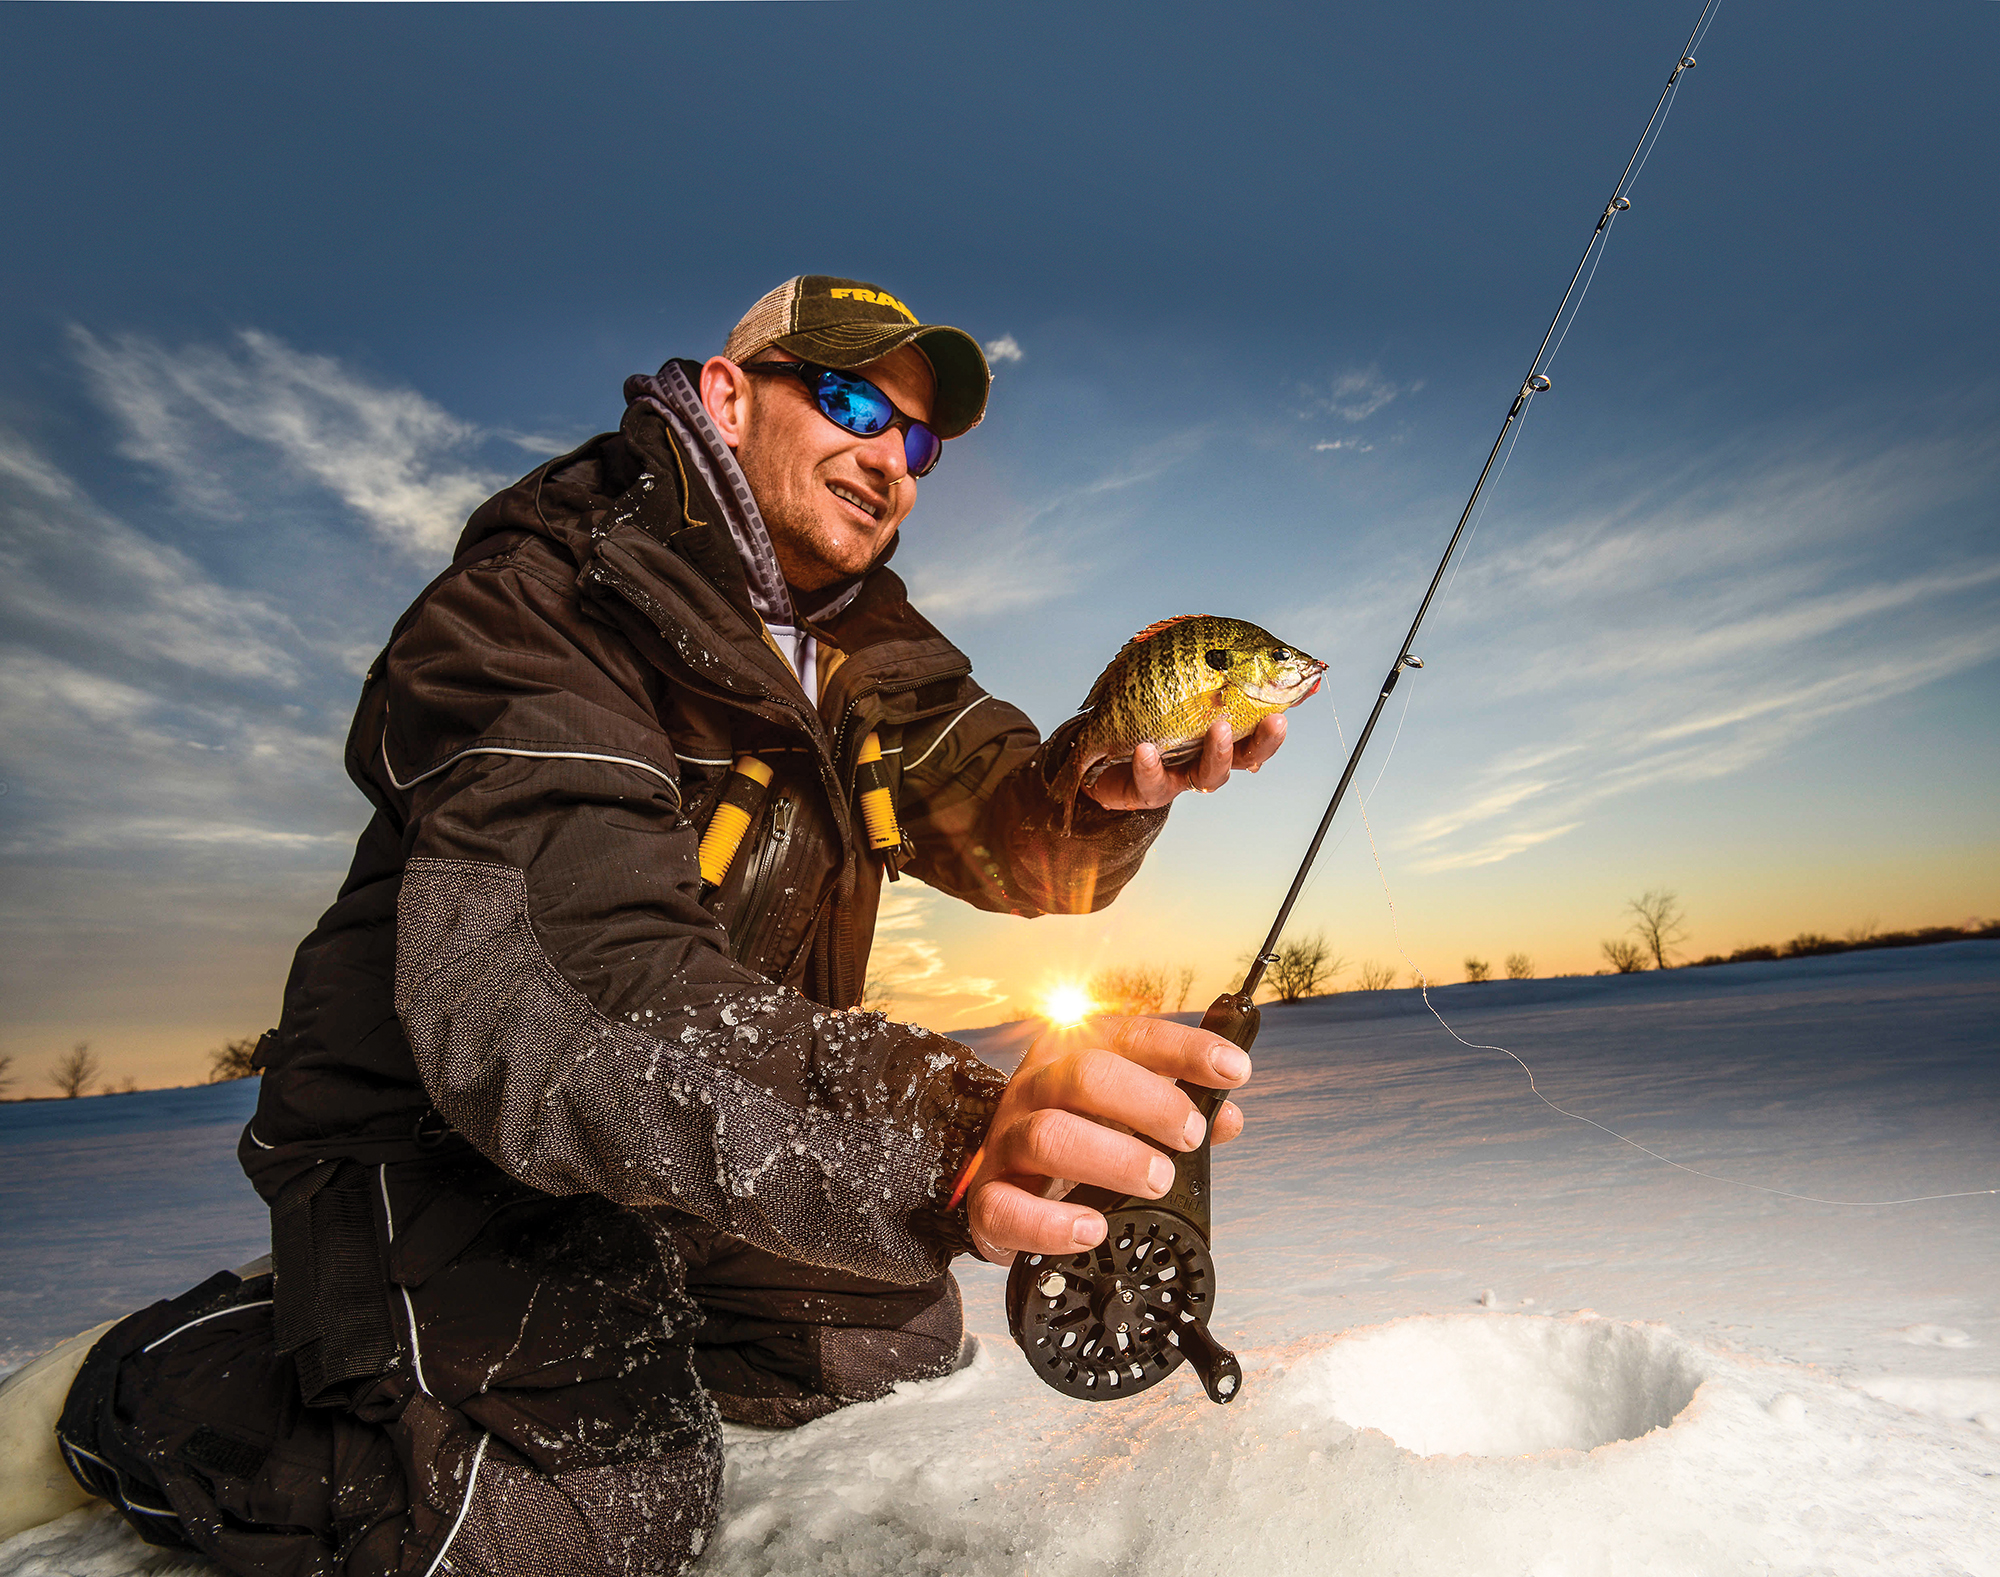 Ice Fishing Rods & Reels